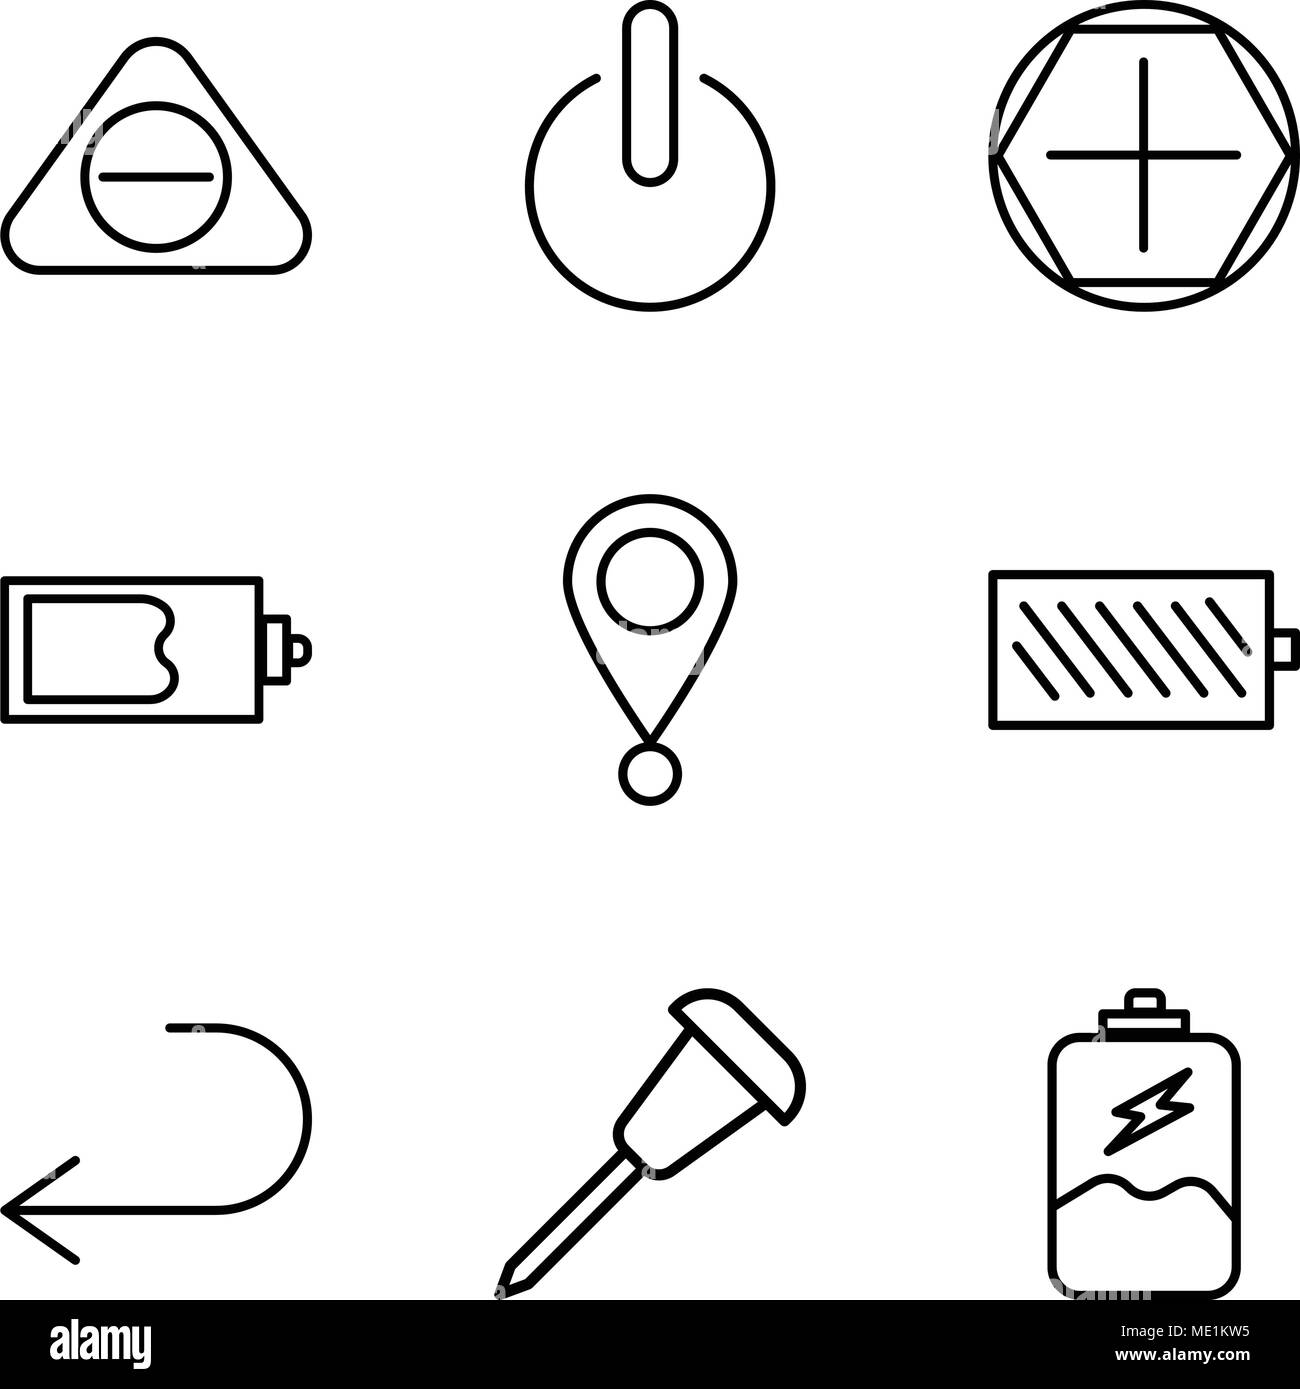 Set Of 9 simple editable icons such as Battery charging, Pushpin, Arrow pointing to left, Battery level, Location pointer, Magic wand, Add tool, Power Stock Vector